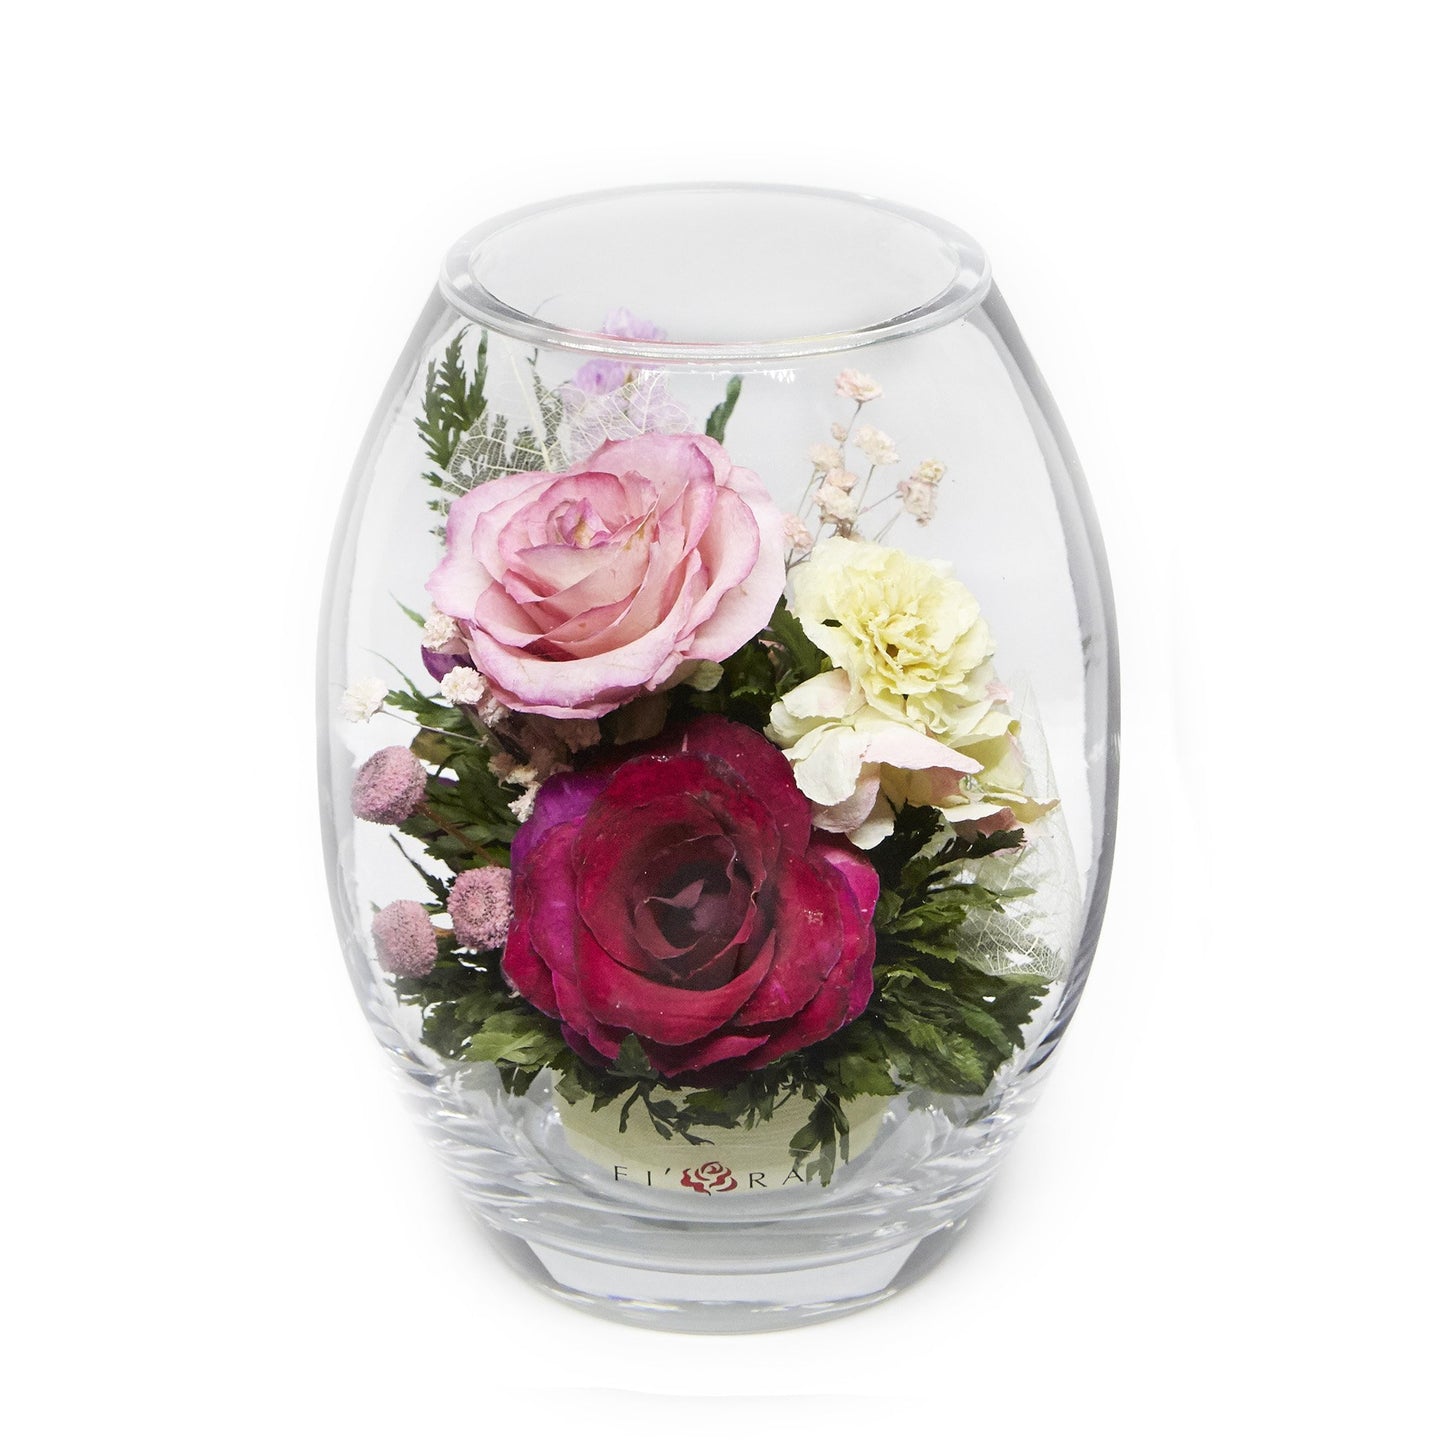 60199 Long-Lasting Purple and Pink Roses and Hydrangea in a Glass Vase - FIORA FLOWER